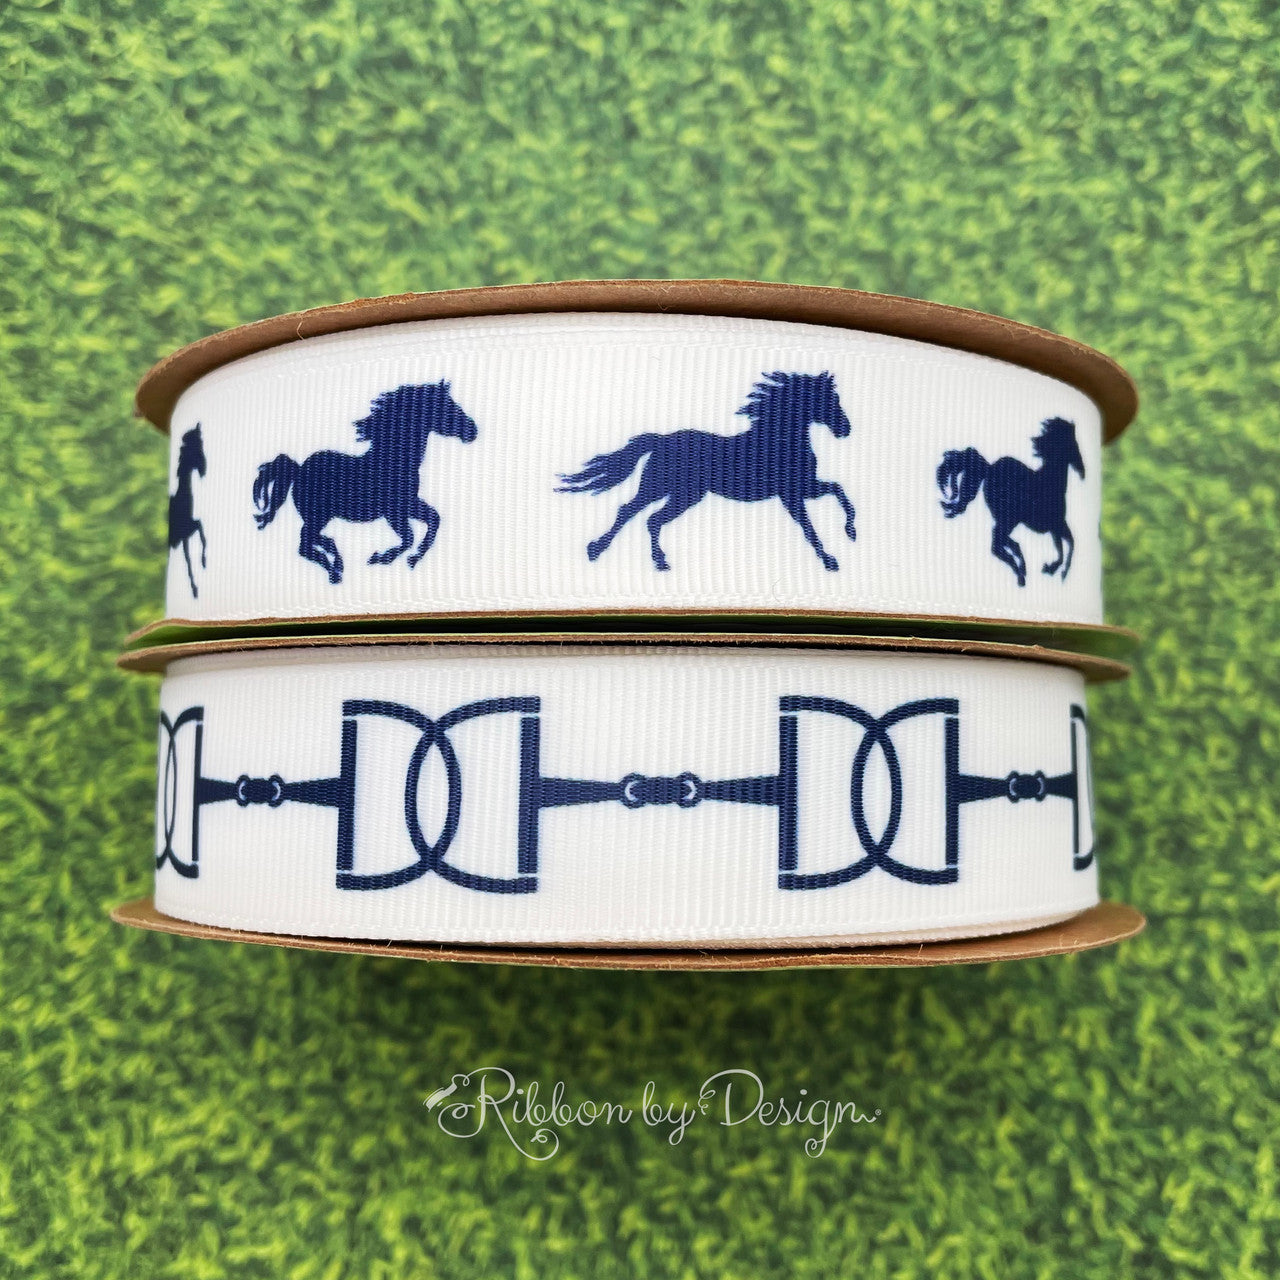 Pair the galloping horse ribbon with the snaffle bit grosgrain ribbon for a beautiful bow combination!